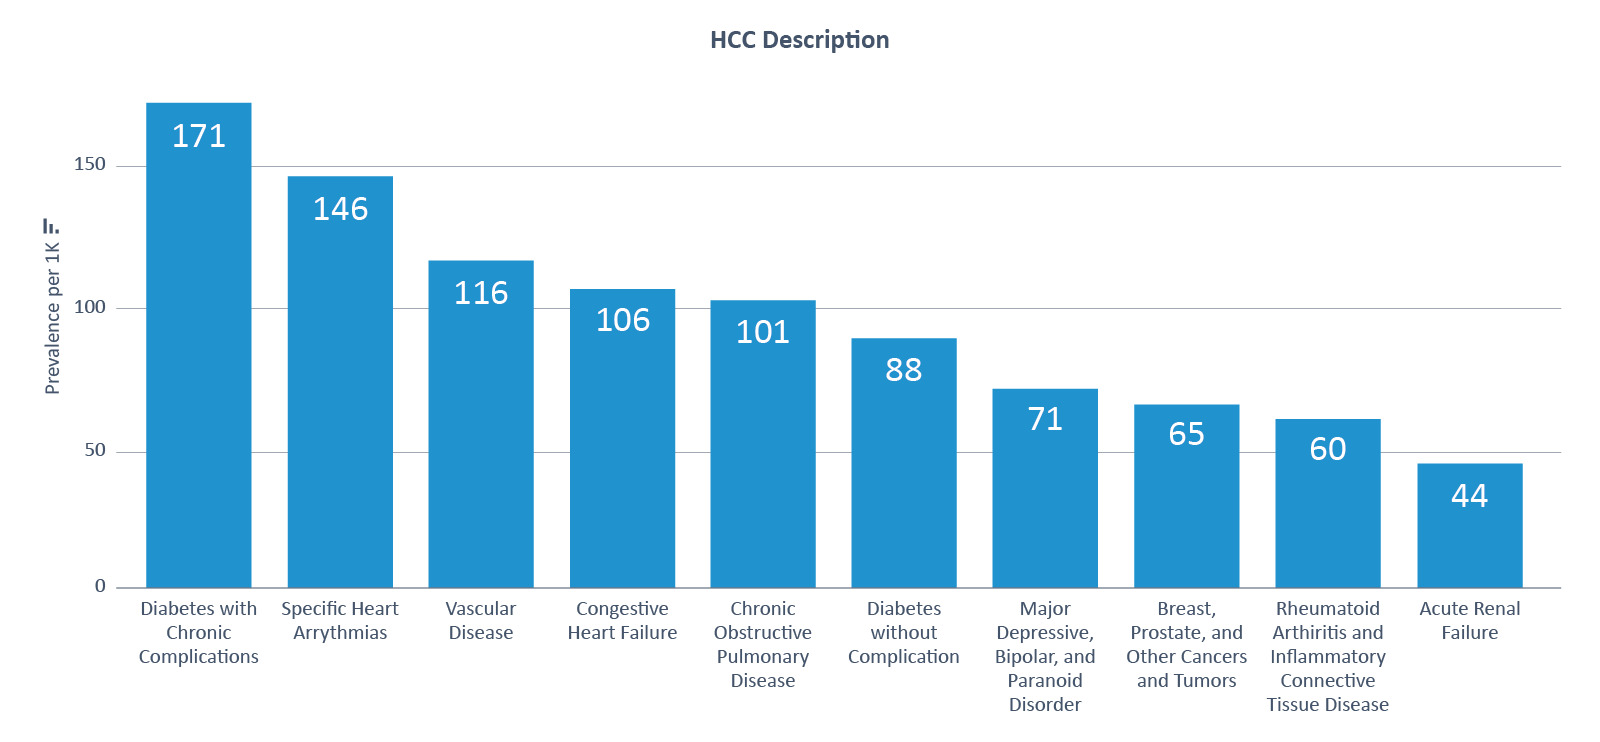 Top 10 HCCs by Prevalence